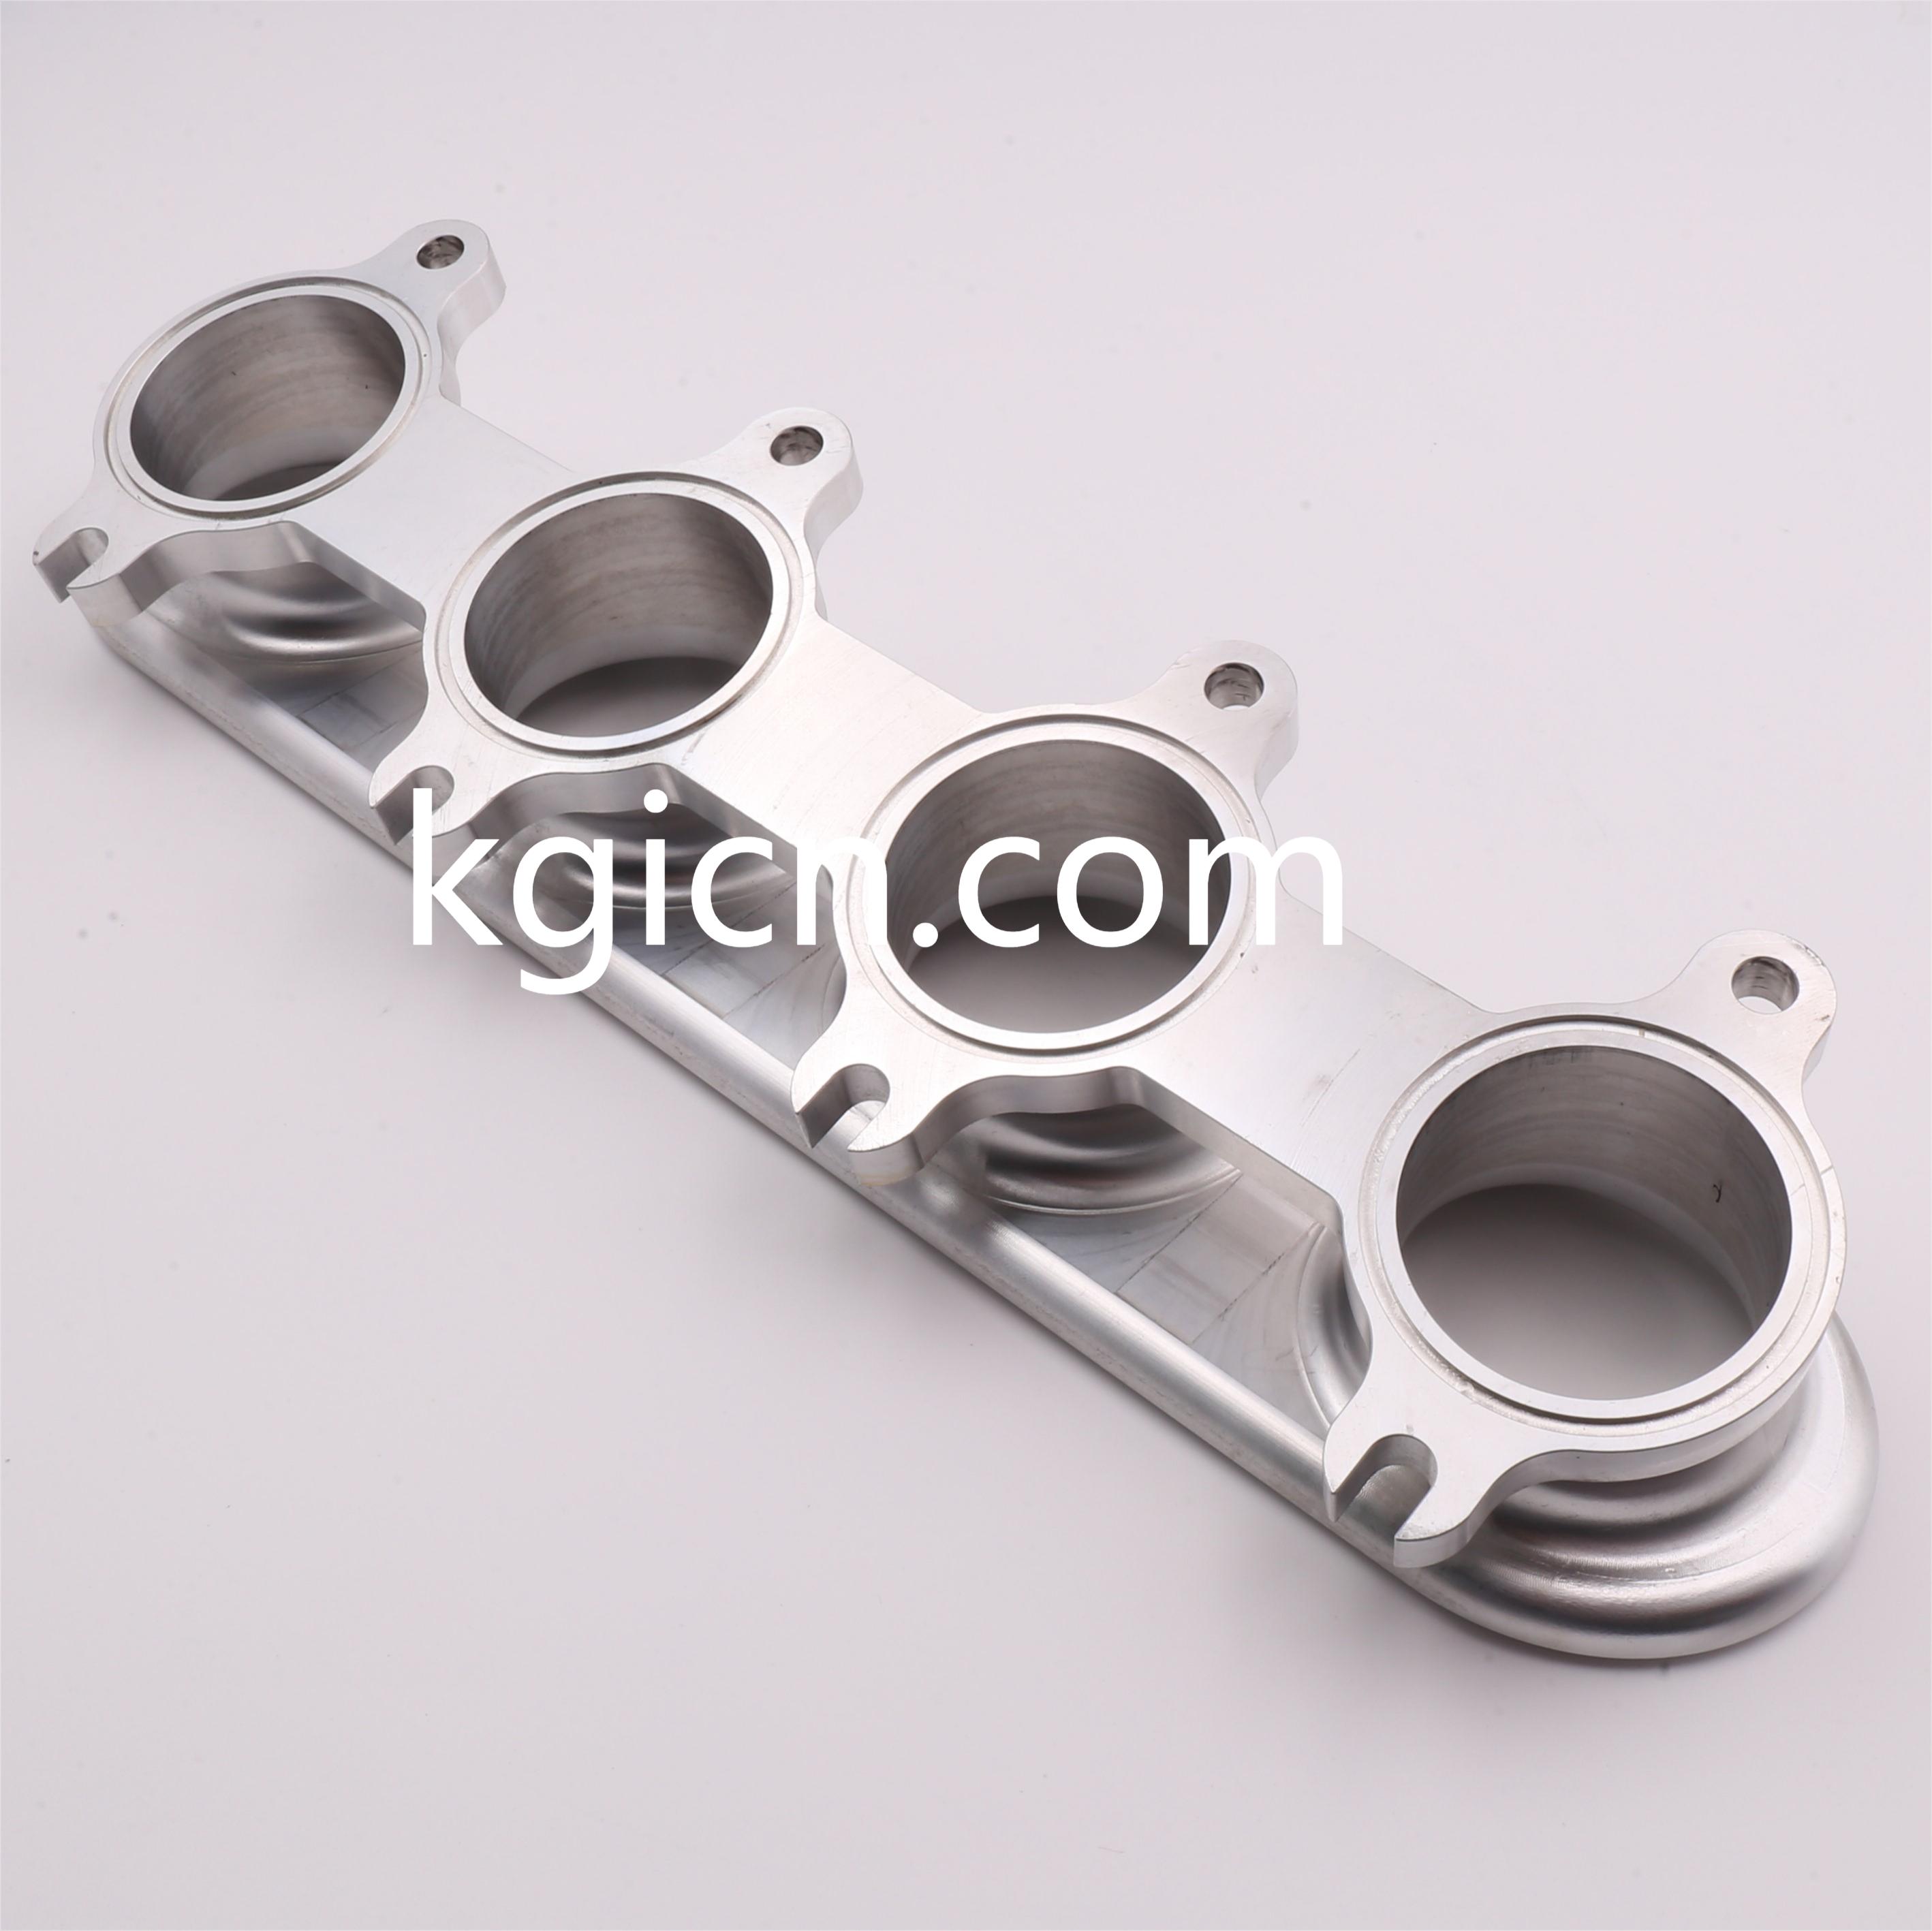 Professional Customized Metal Turning and CNC Milling 4 axis Aluminum Machining